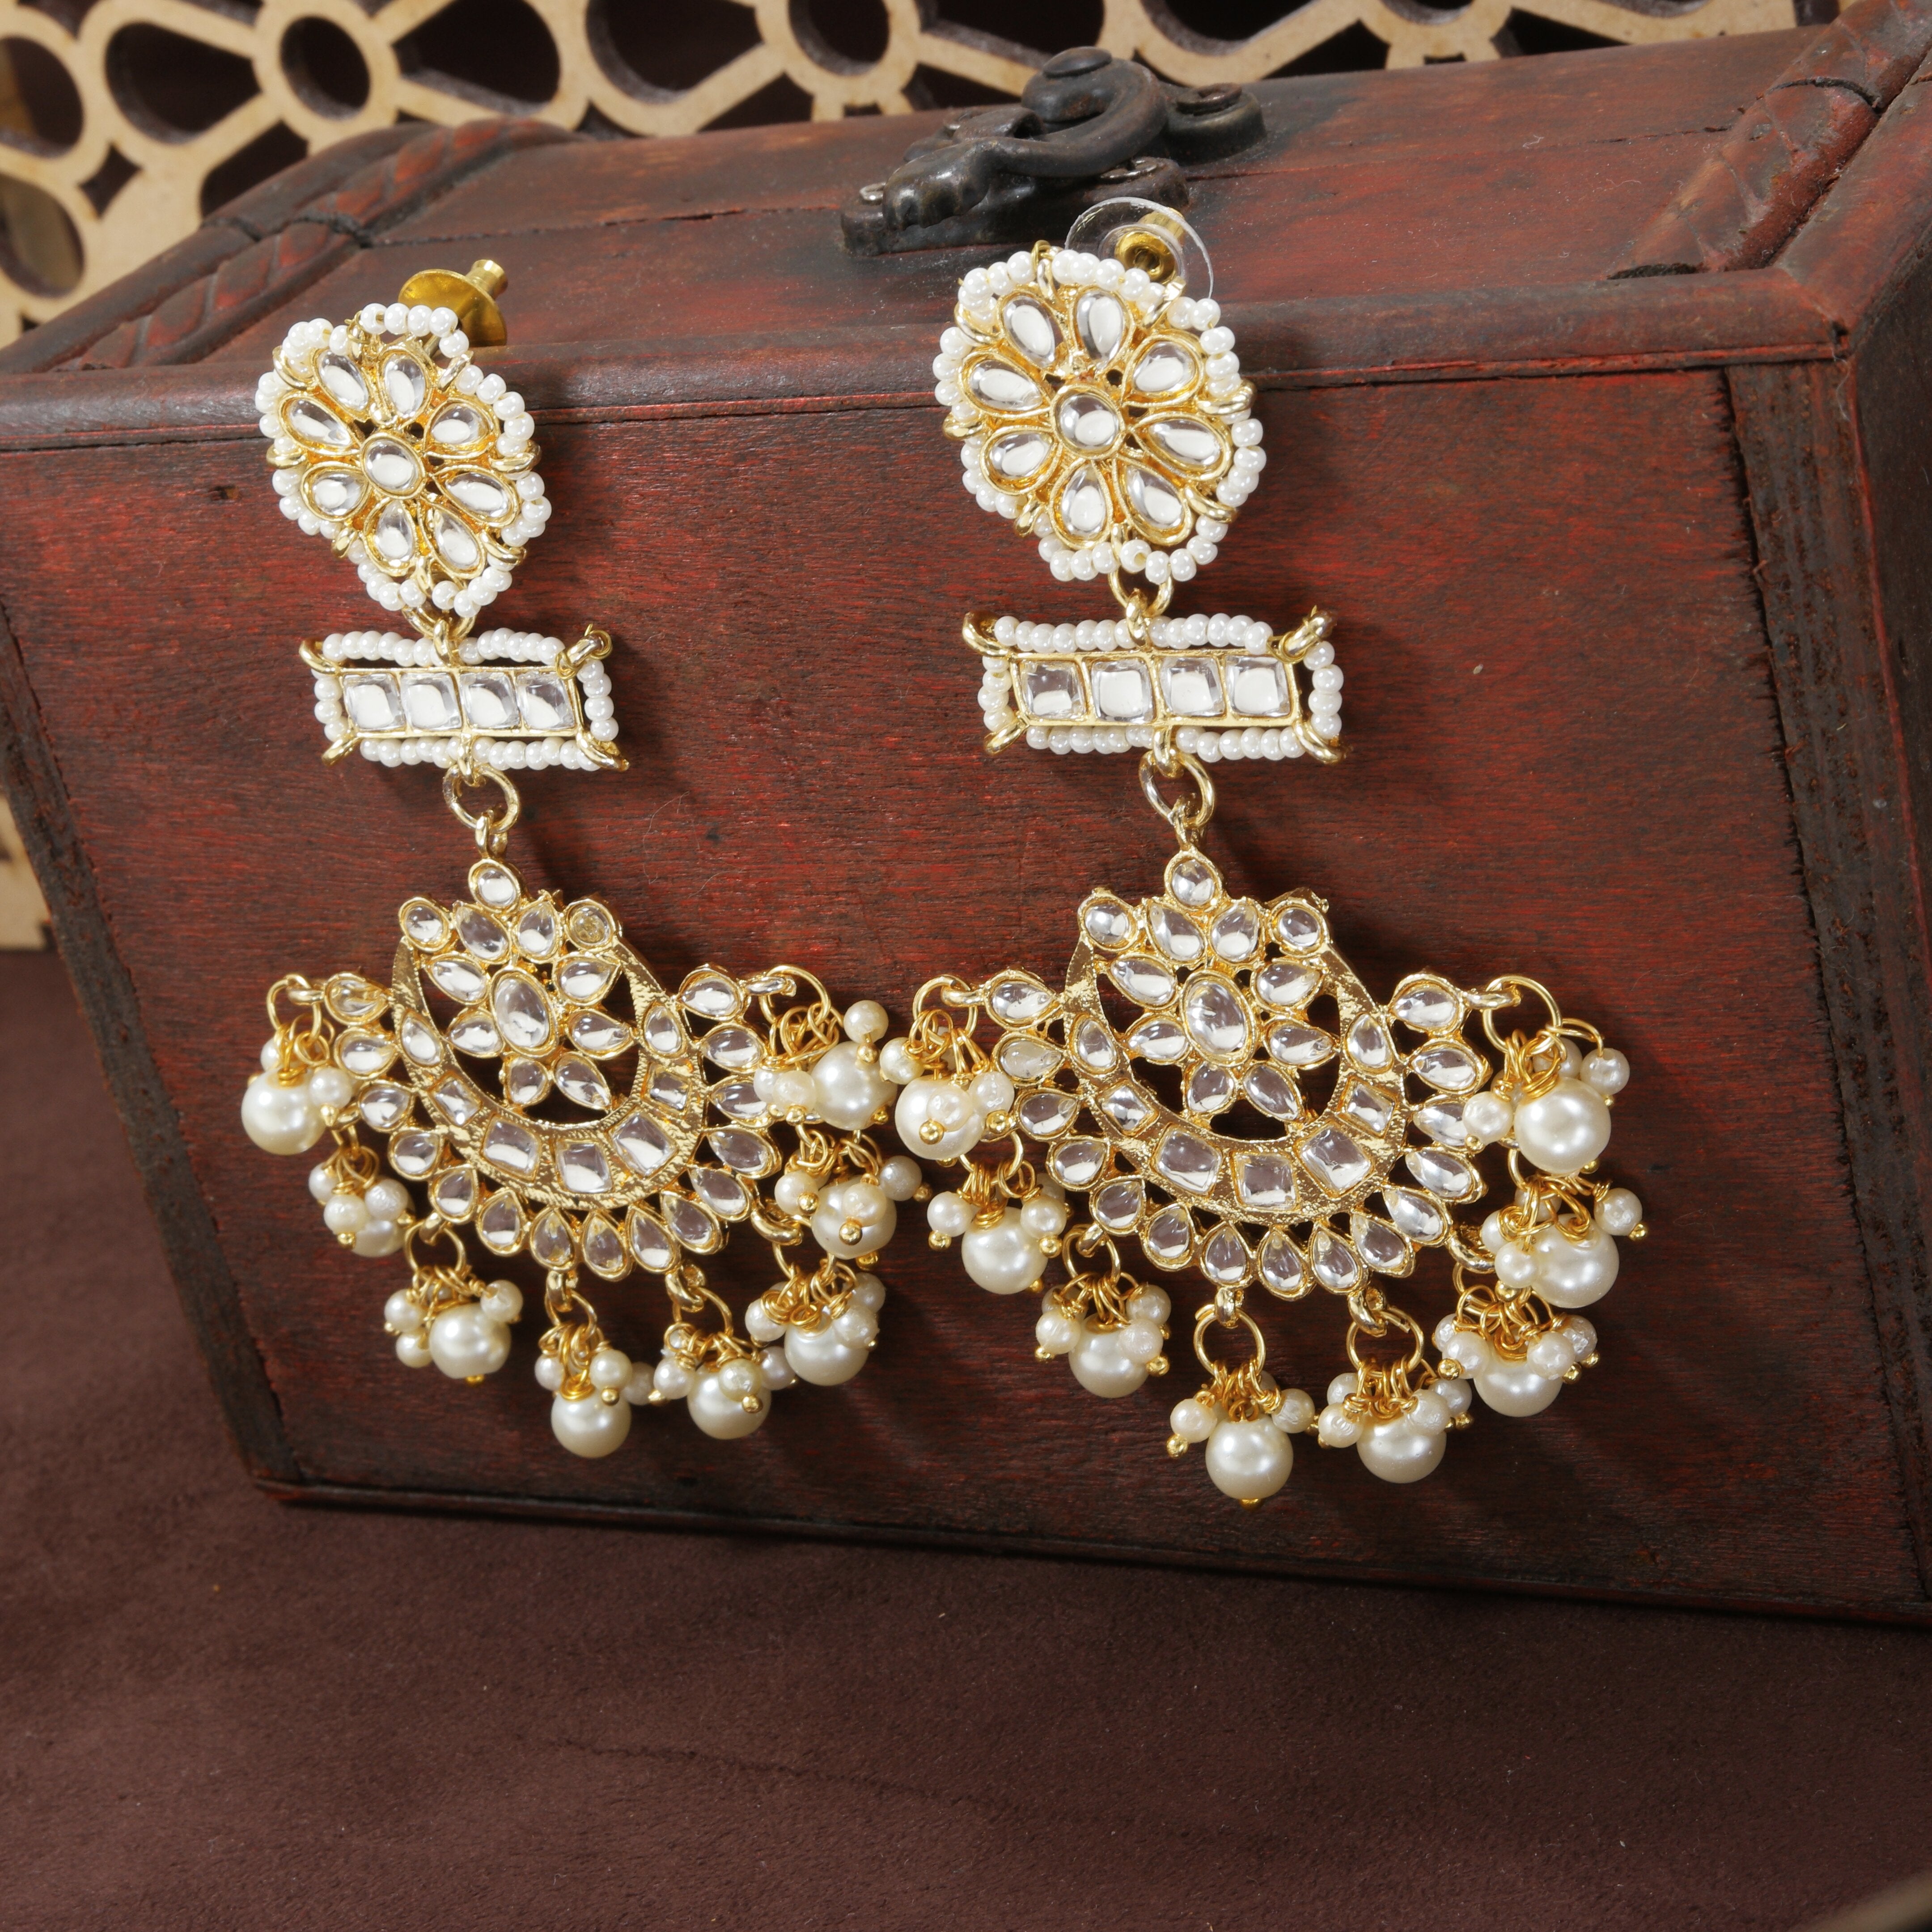 Women's White Gold Plated Beaded Chandbali Earrings Glided With Kundans & Pearls  - i jewels